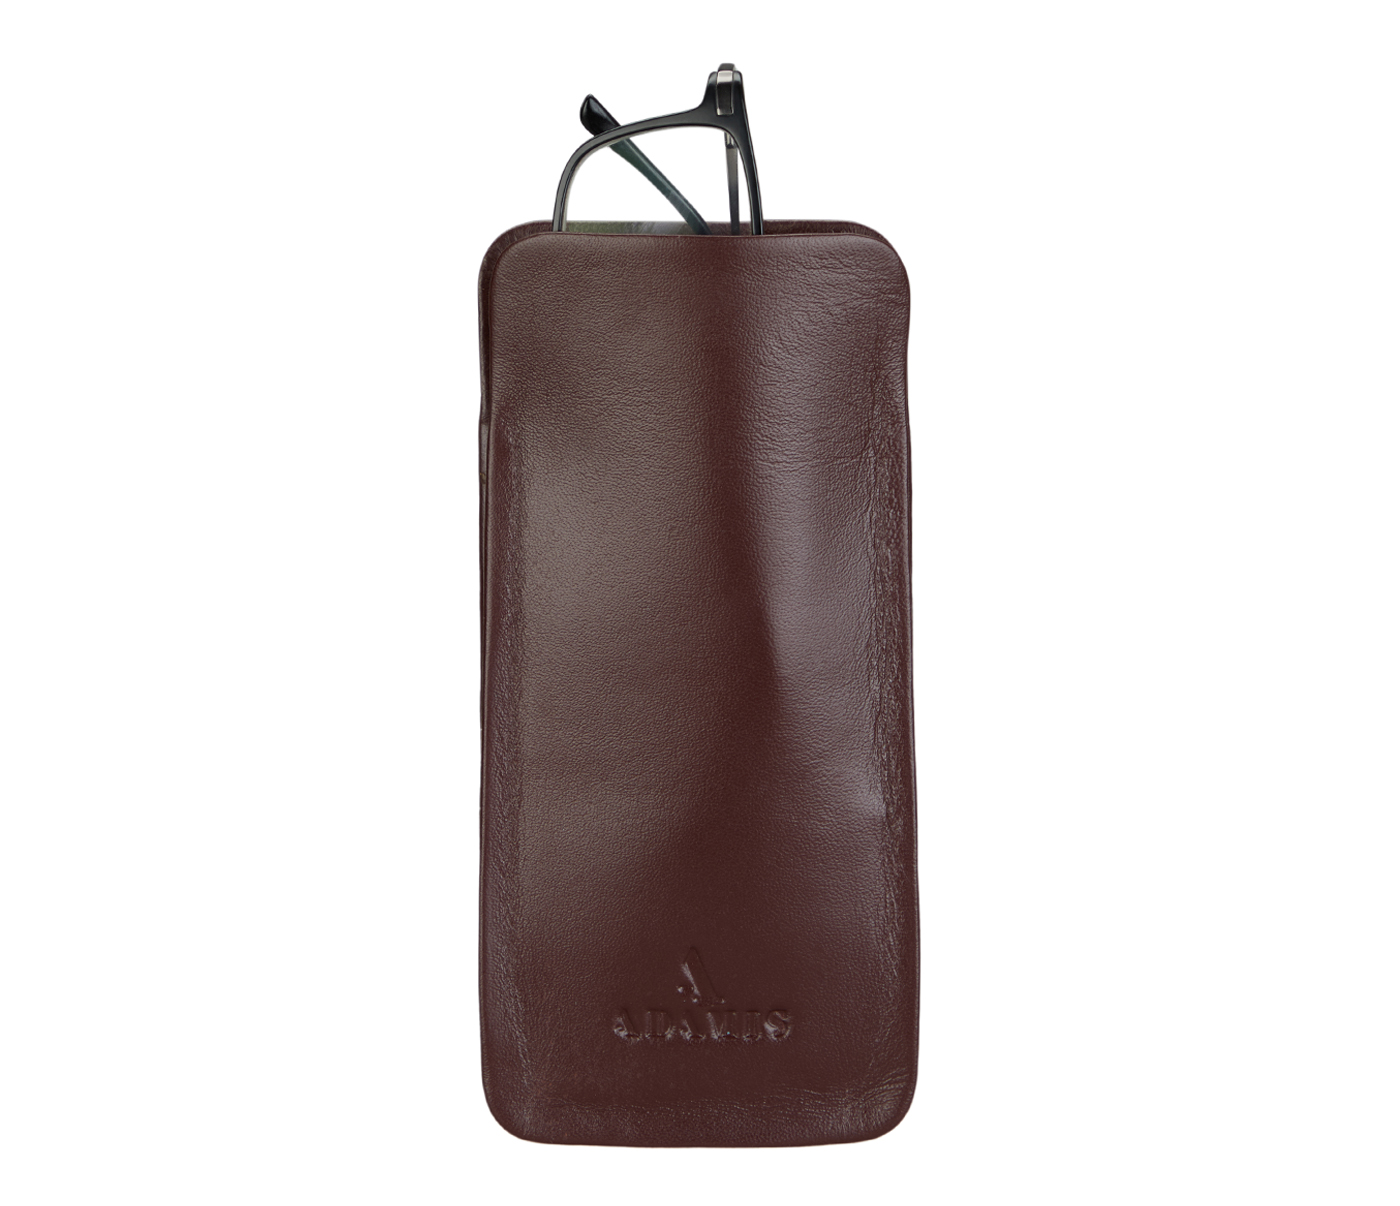 VW11--Soft stitch free spectacle case in Genuine Leather - Wine